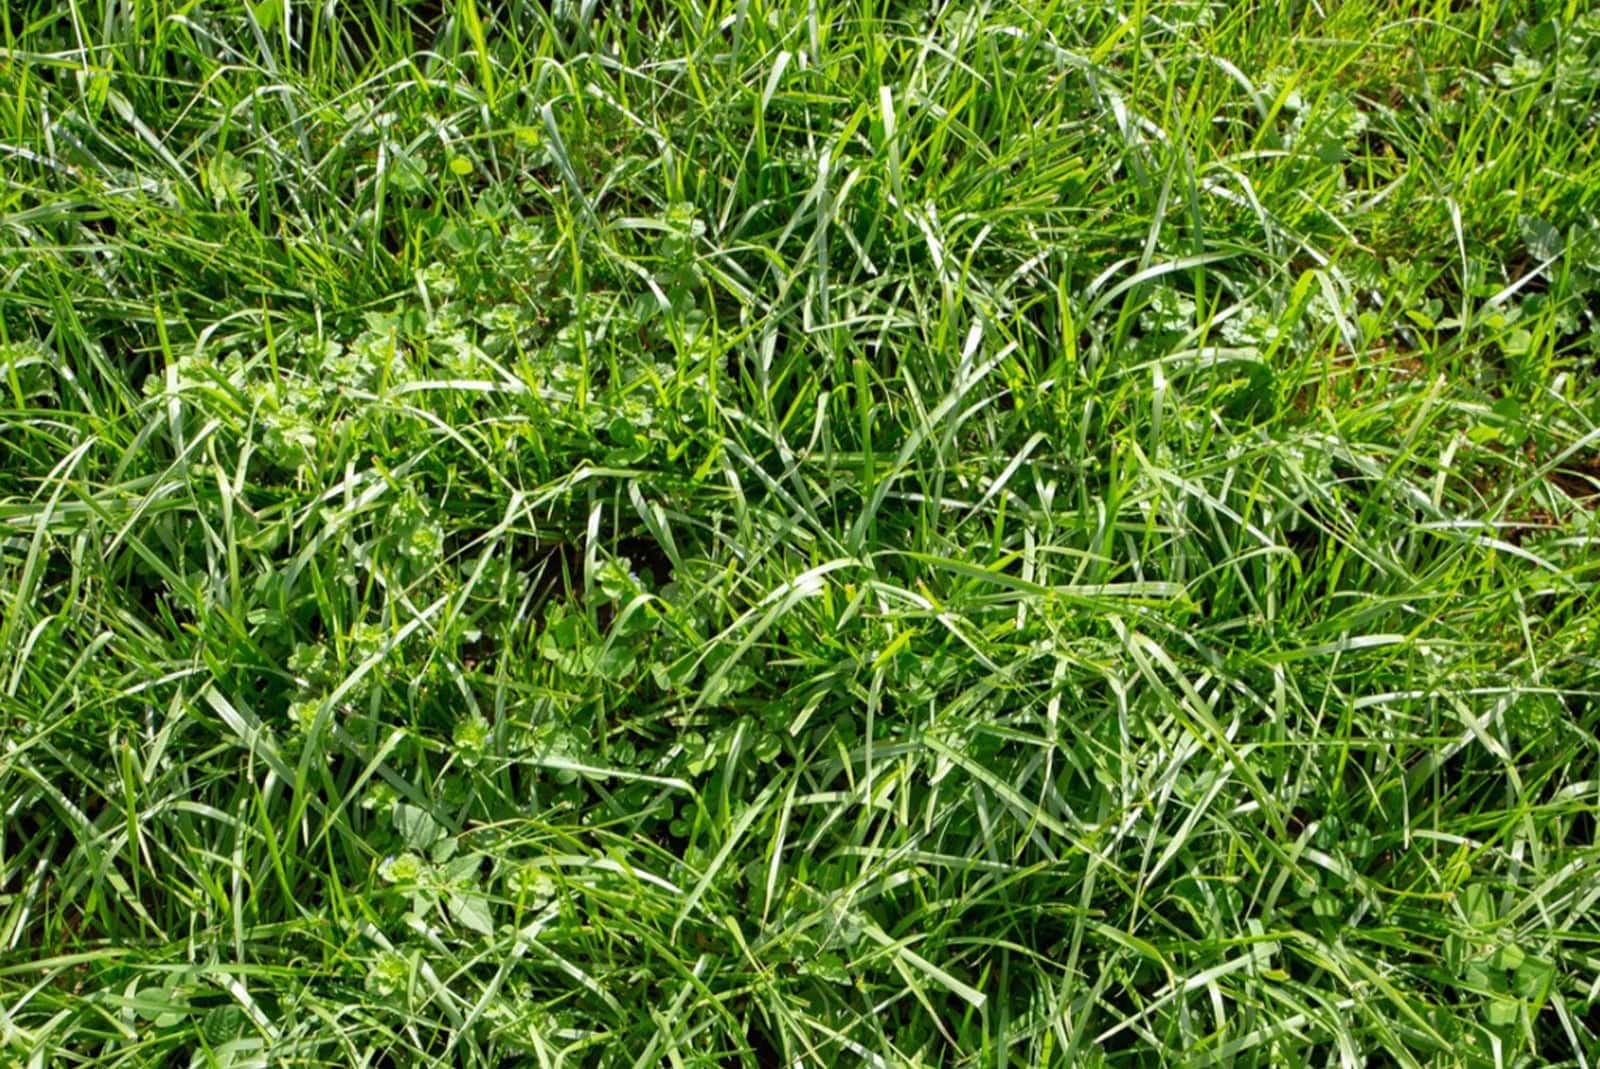 How To Get Rid Of Tall Fescue Without Killing Grass